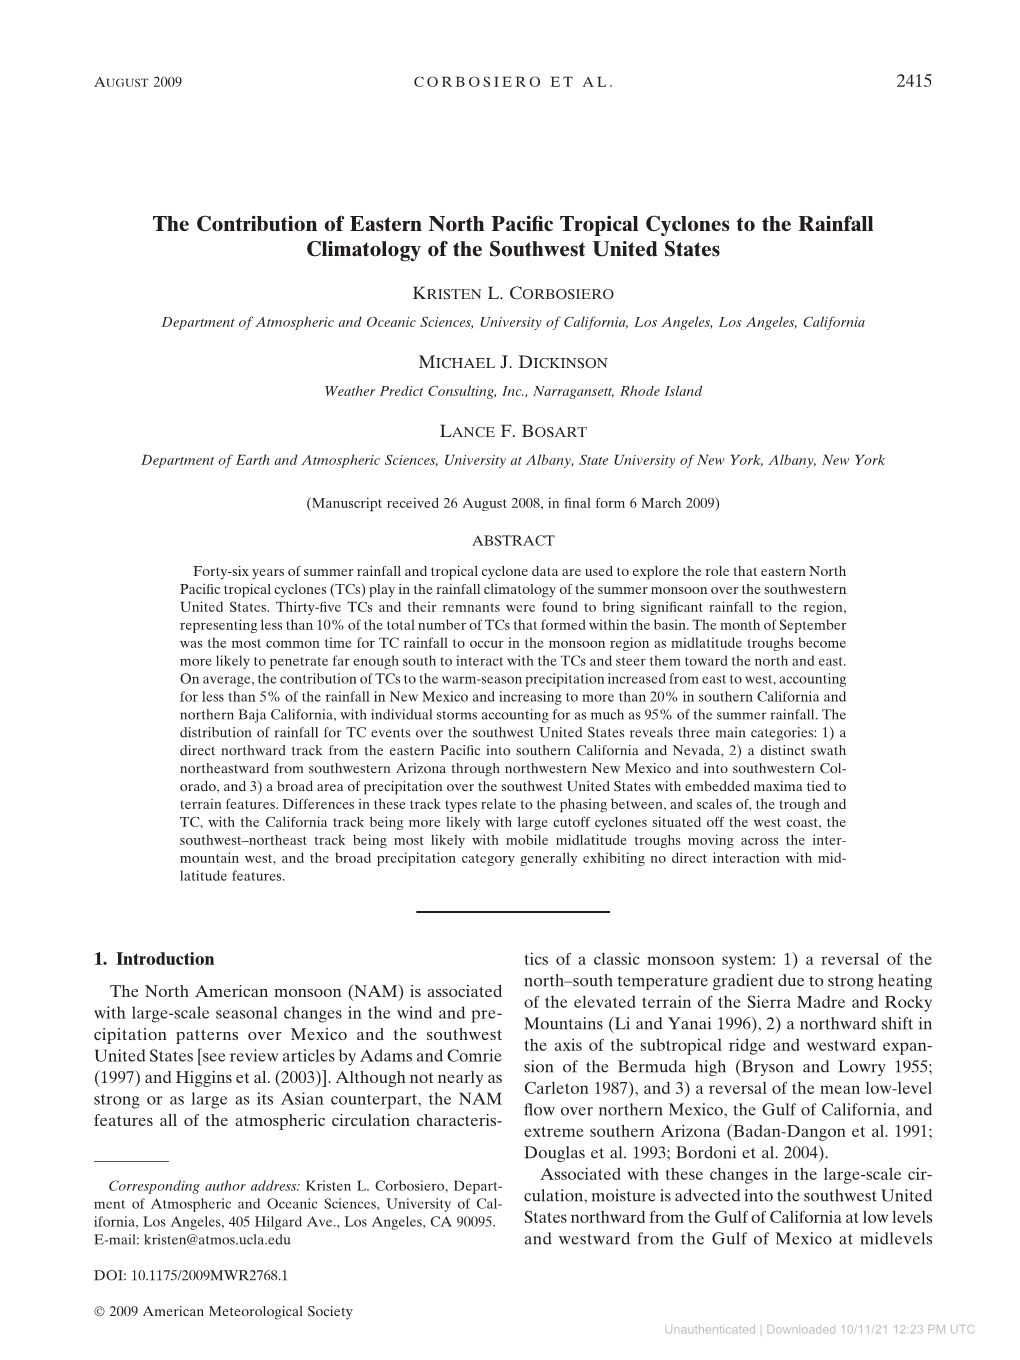 The Contribution of Eastern North Pacific Tropical Cyclones to The